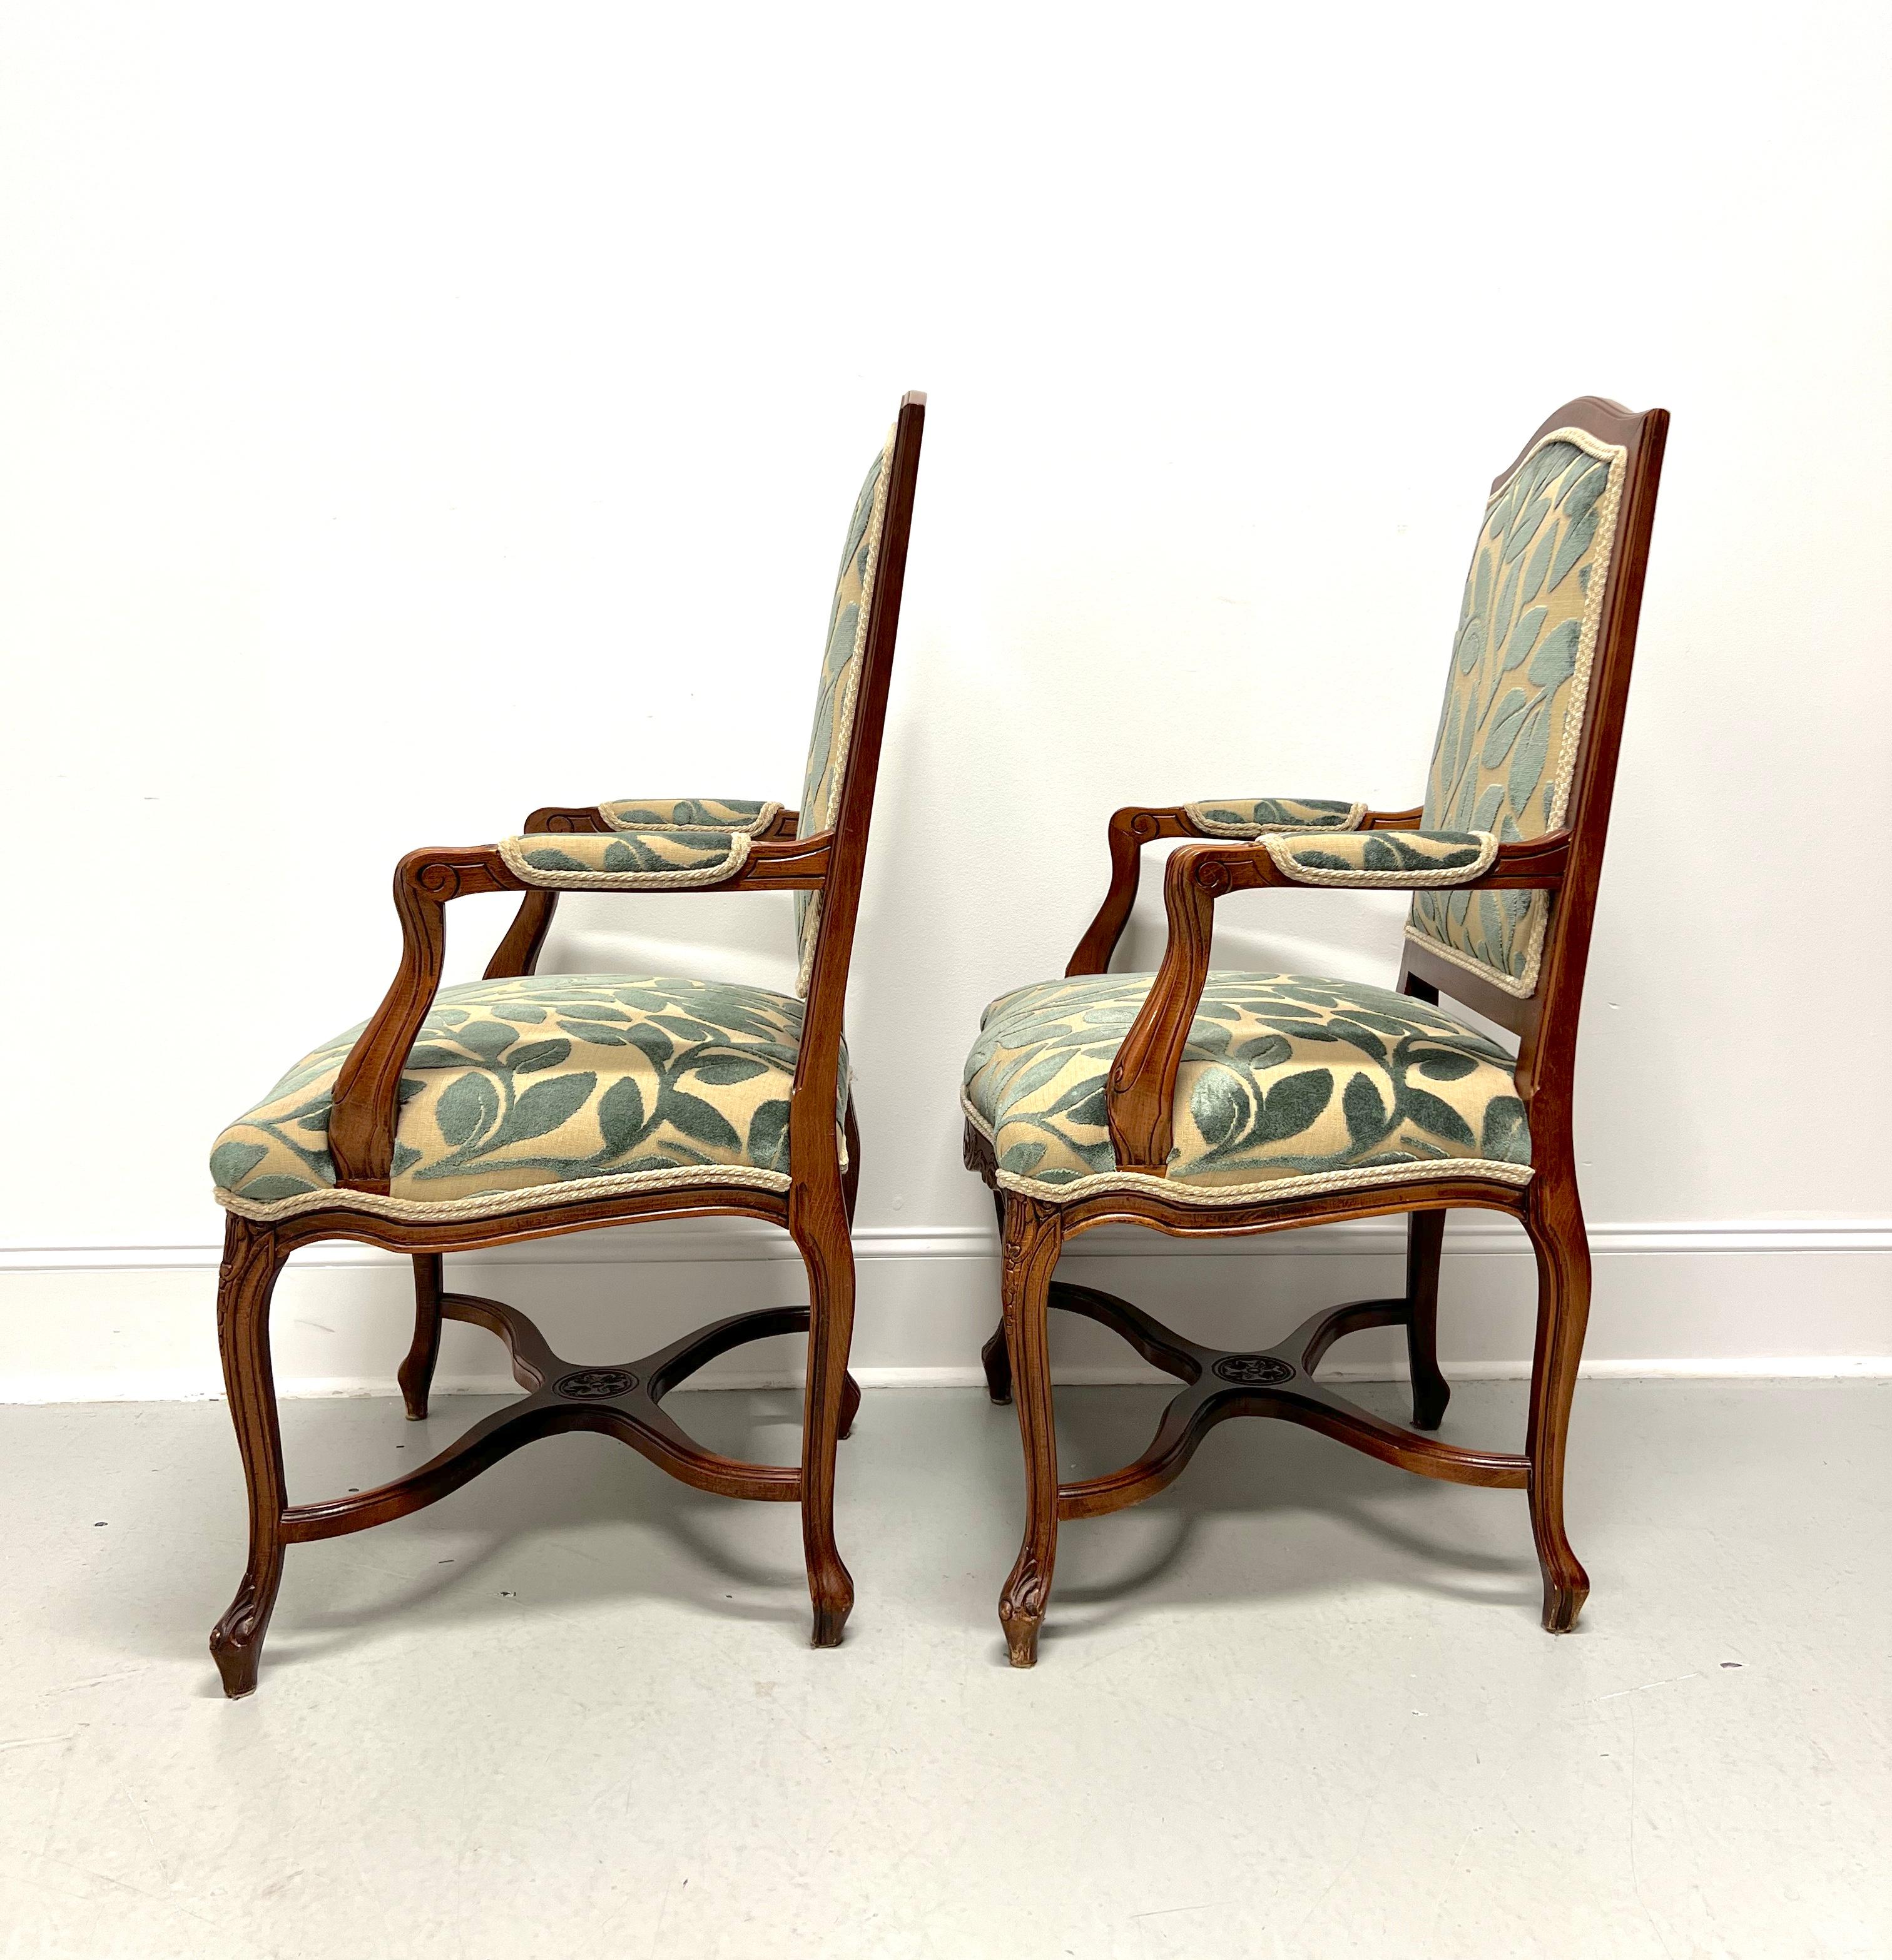 Fabric 20th Century French Country Louis XV Walnut Fauteuils Open-Arm Armchairs - Pair For Sale